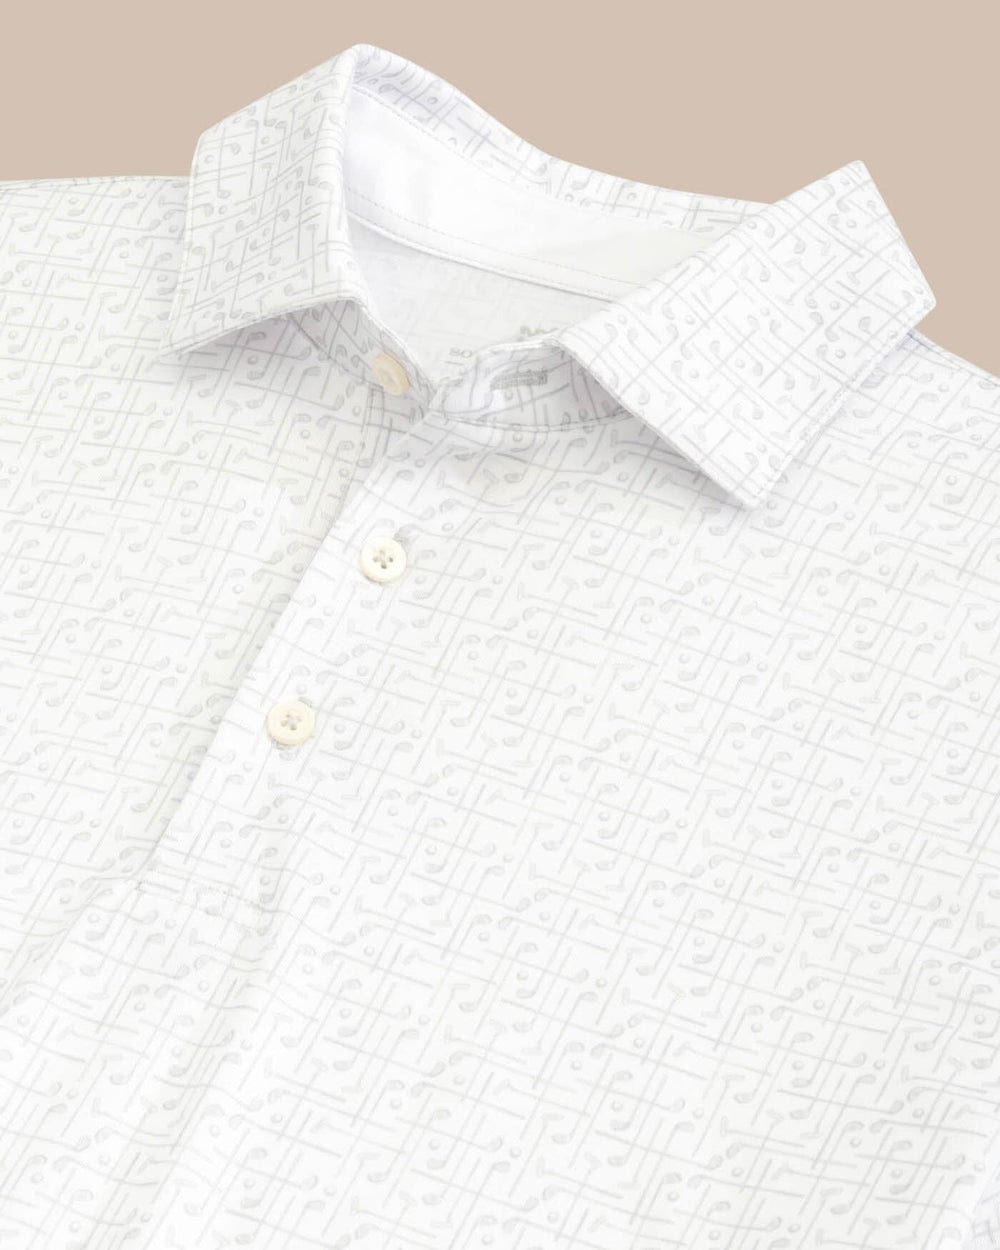 The detail view of the Southern Tide Driver Over Clubbing Print Performance Polo Shirt by Southern Tide - Classic White